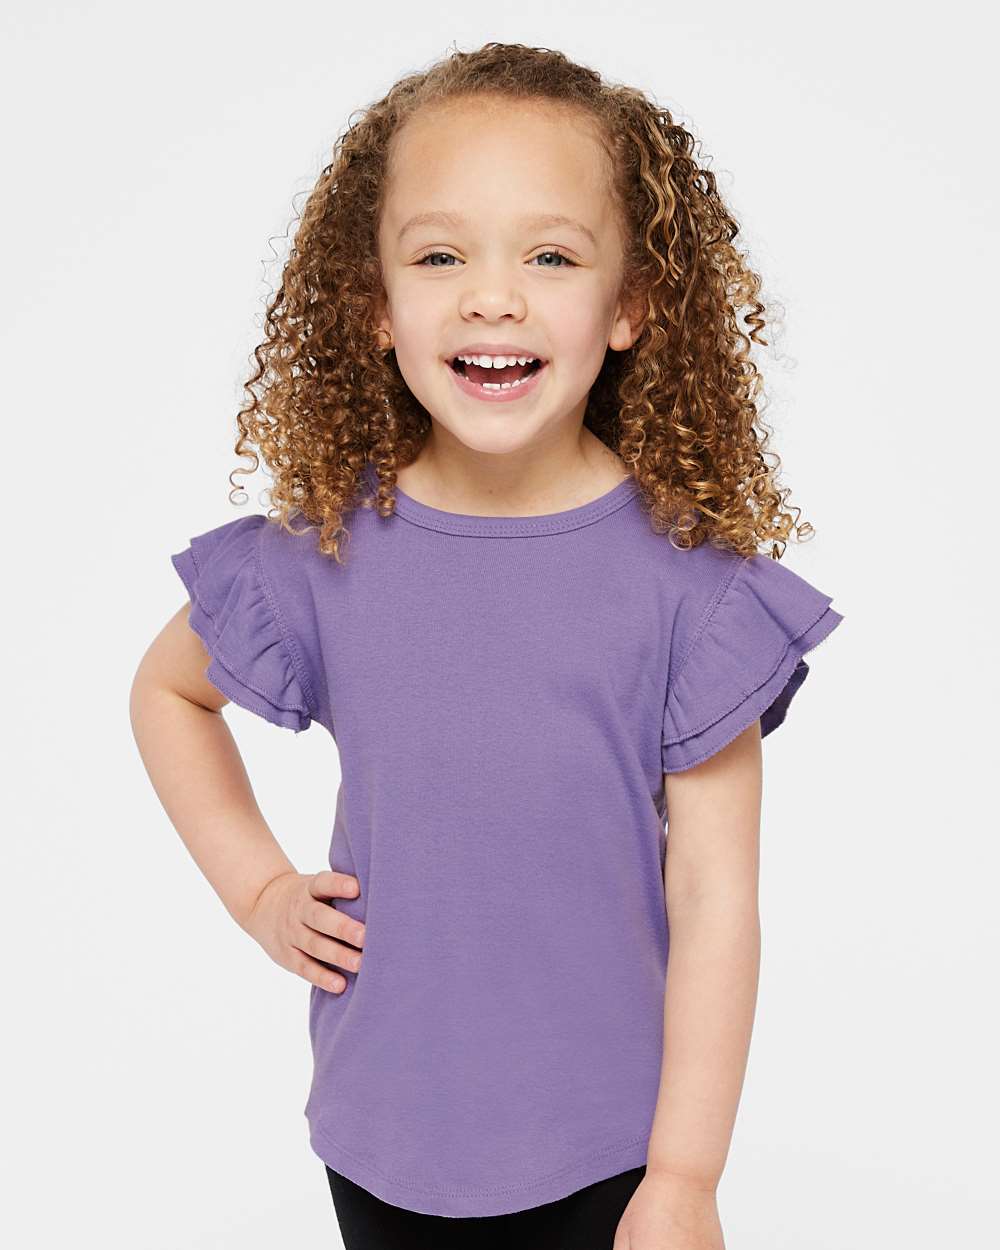 Premium Toddler Flutter Sleeve Tee, Self-Fabric Flutter Detail Tee, Stylish Kids Clothing | This toddler girls&#x27; Flutter Sleeve tee offers adorable, fun sleeve detail paired with the incredible comfort of our soft, stretchy baby rib fabric | RADYAN&#xAE;